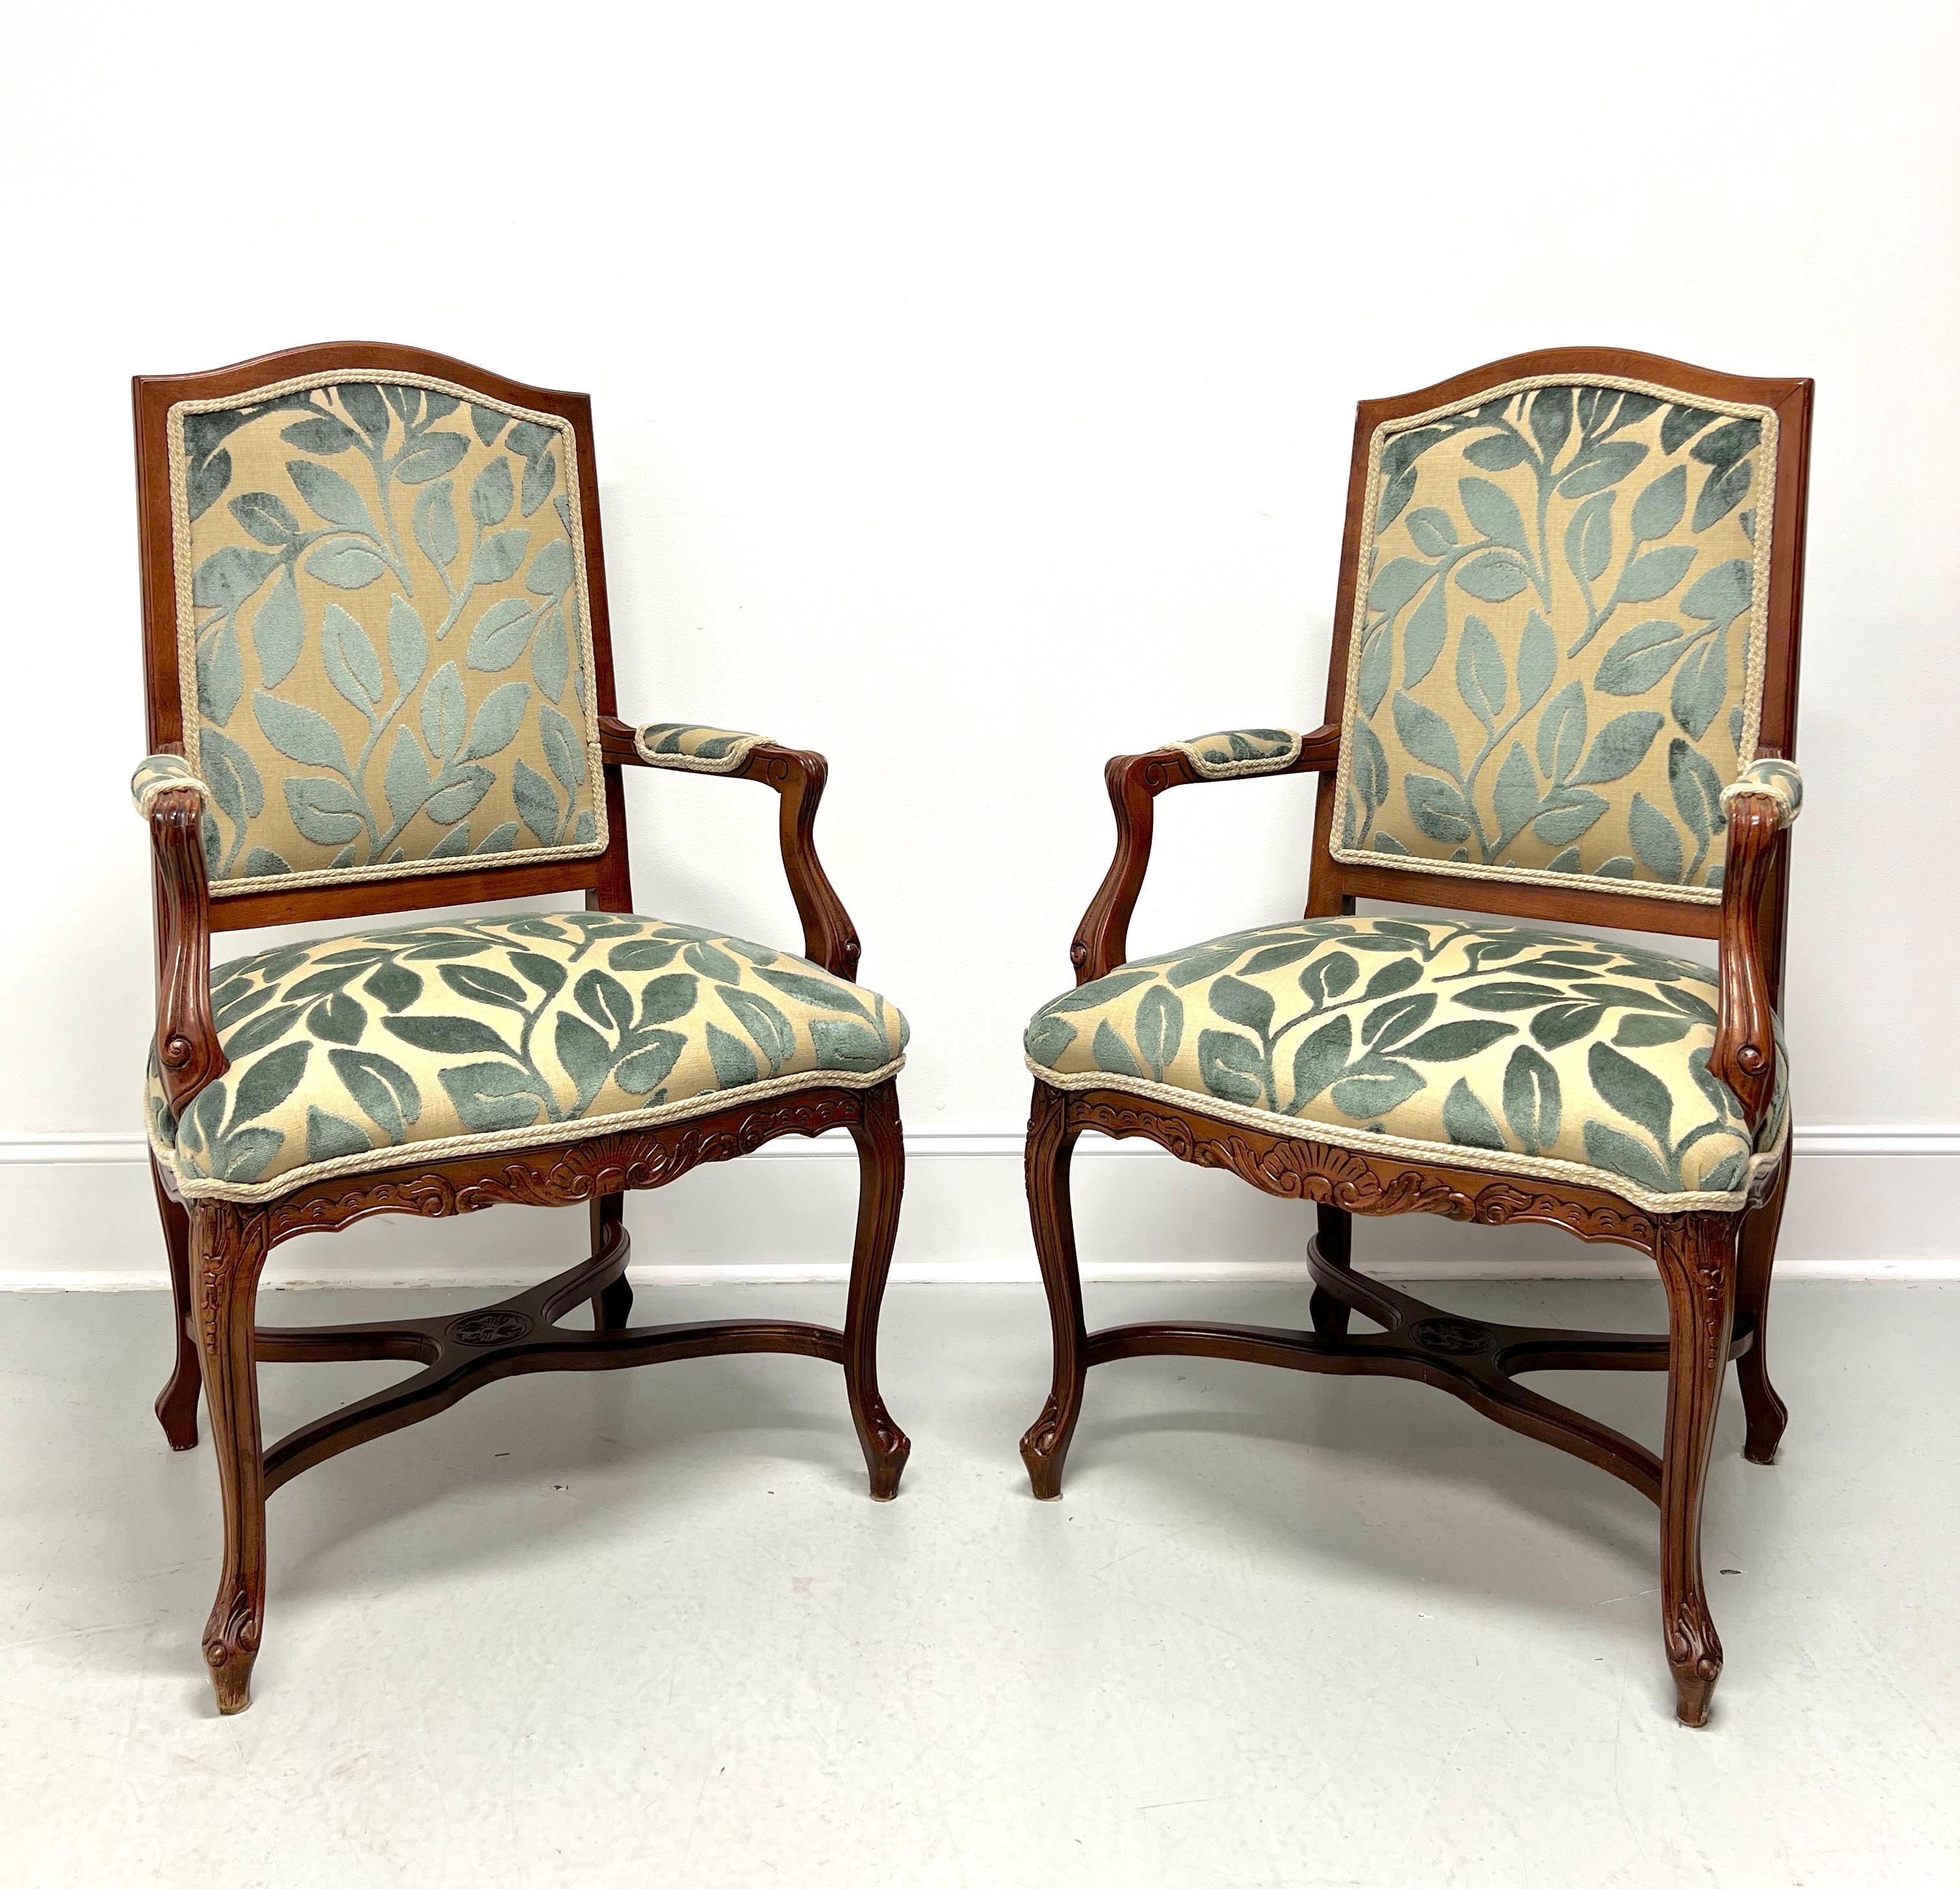 20th Century French Country Louis XV Walnut Fauteuils Open-Arm Armchairs - Pair For Sale 7